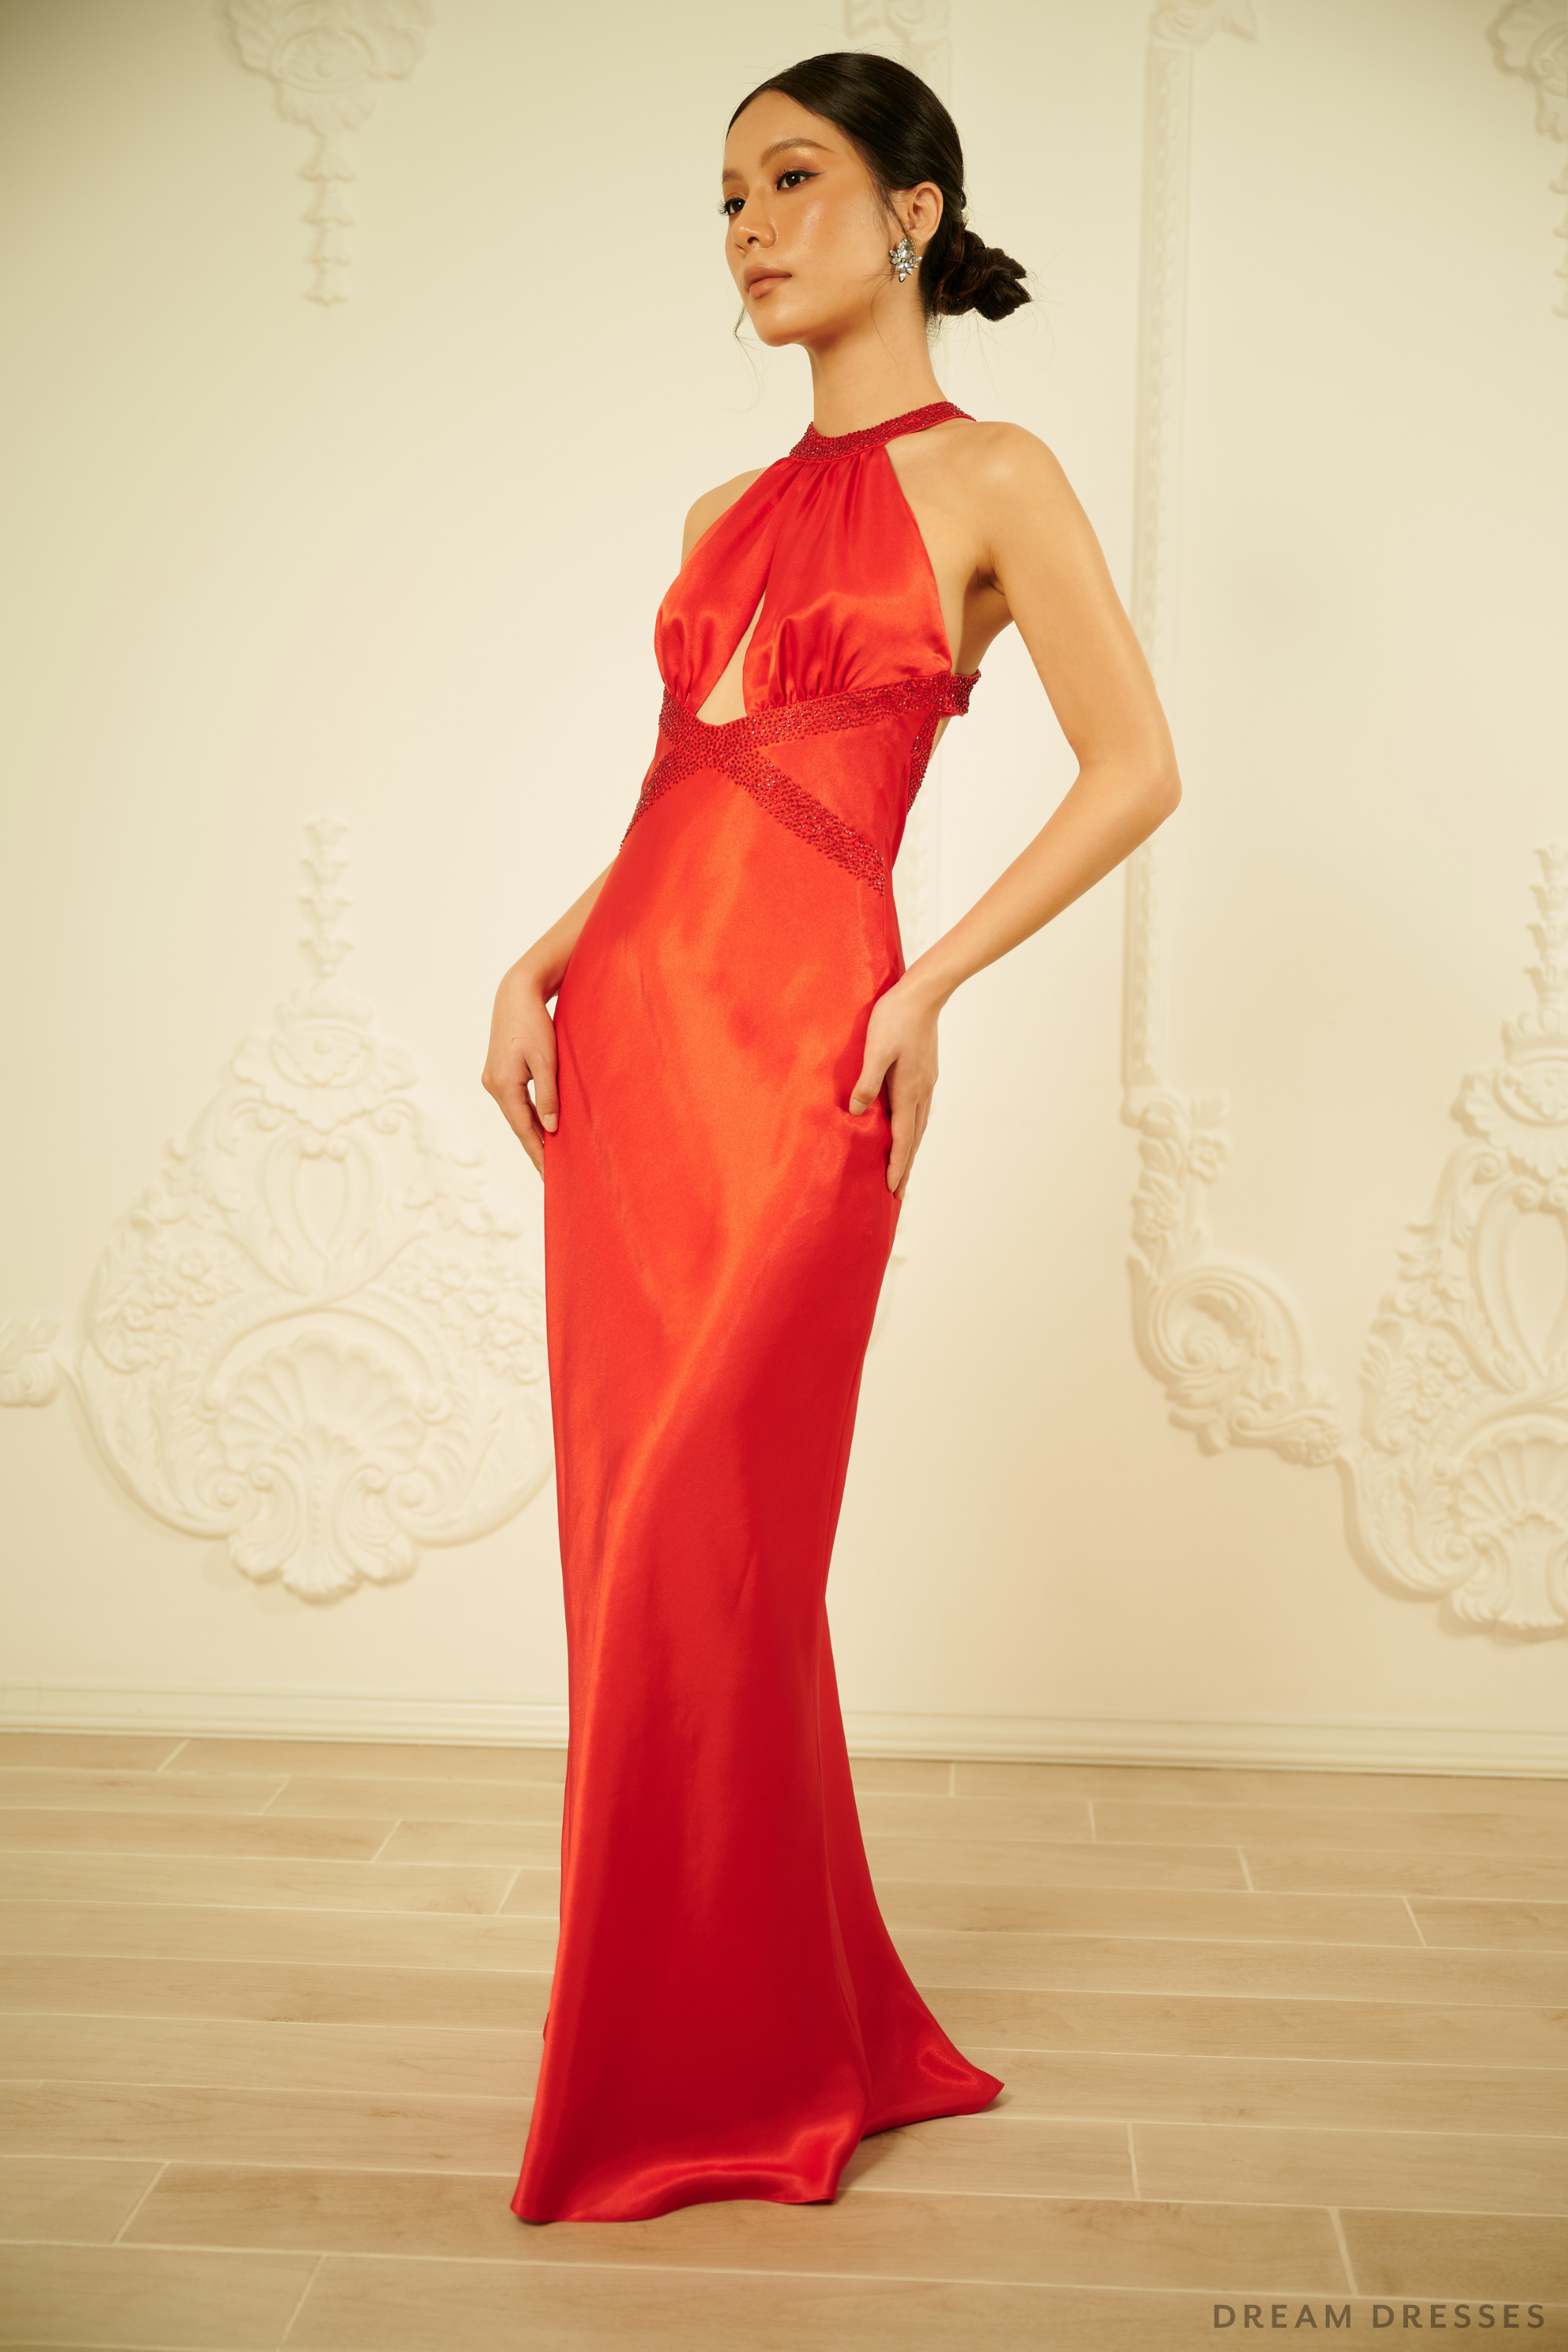 Red Silk Evening Dress with Halter Neck (#LUCIA)